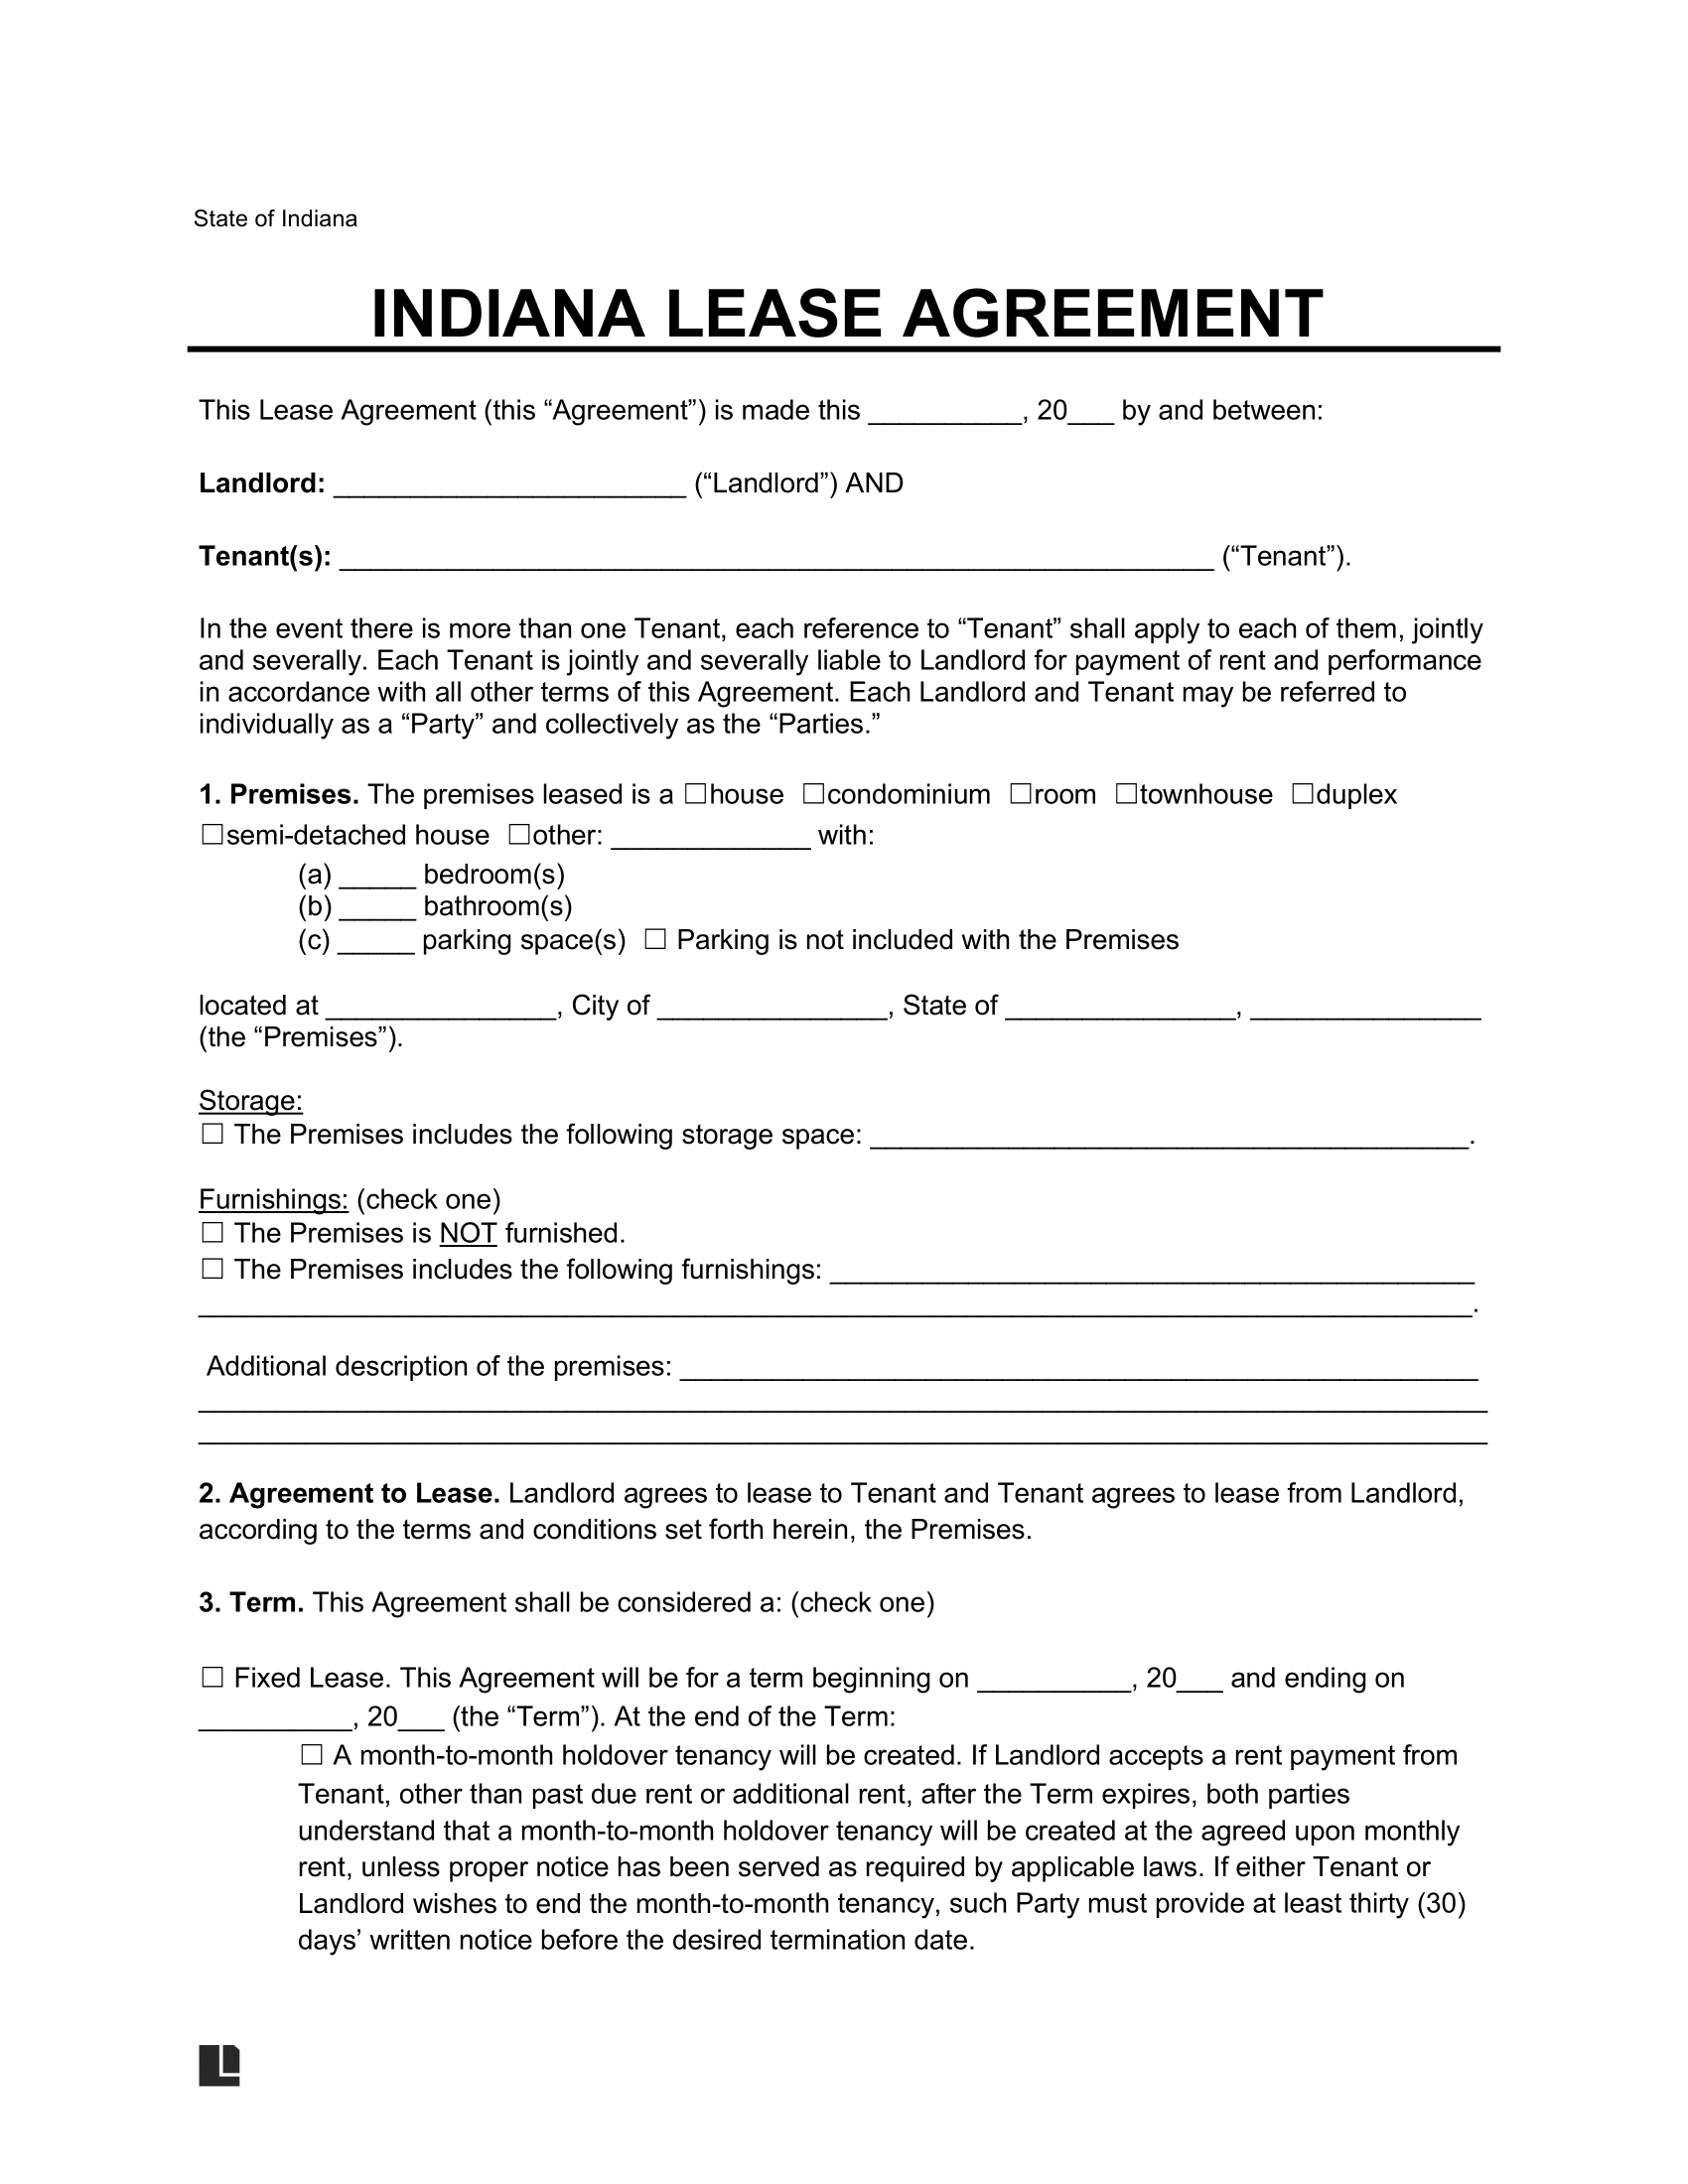 indiana lease agreement